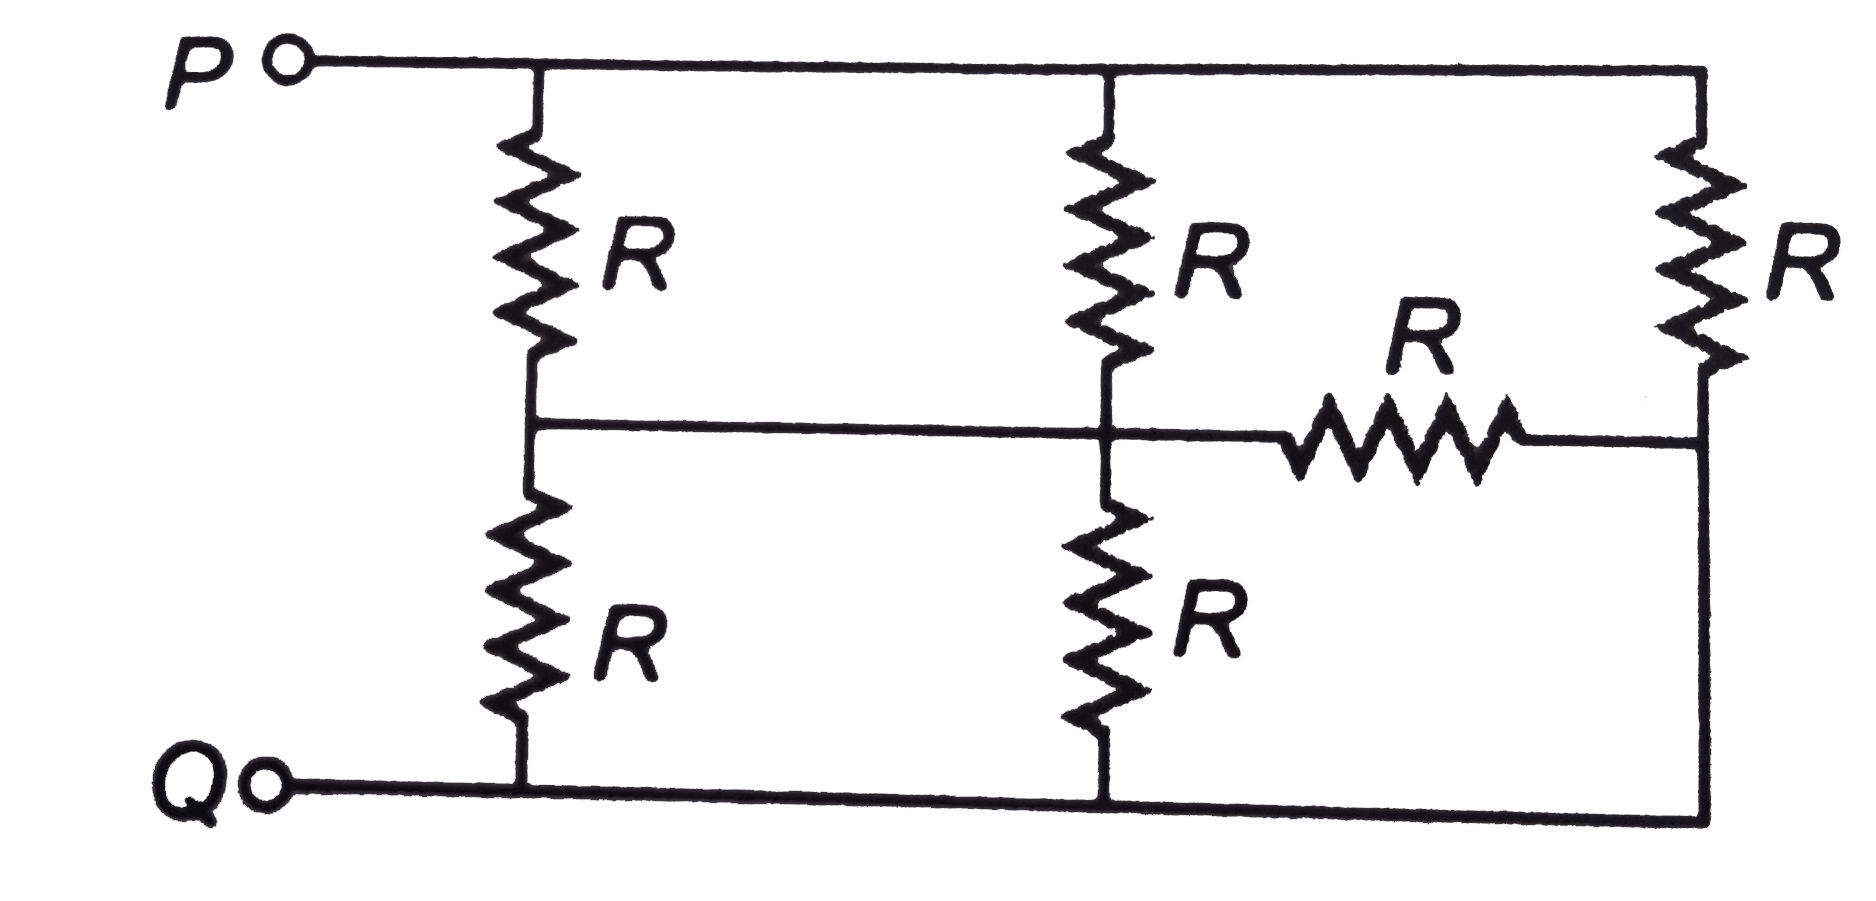 In the circuit shown in figure R=55 Omega the equivalent resistance between the point P and Q is